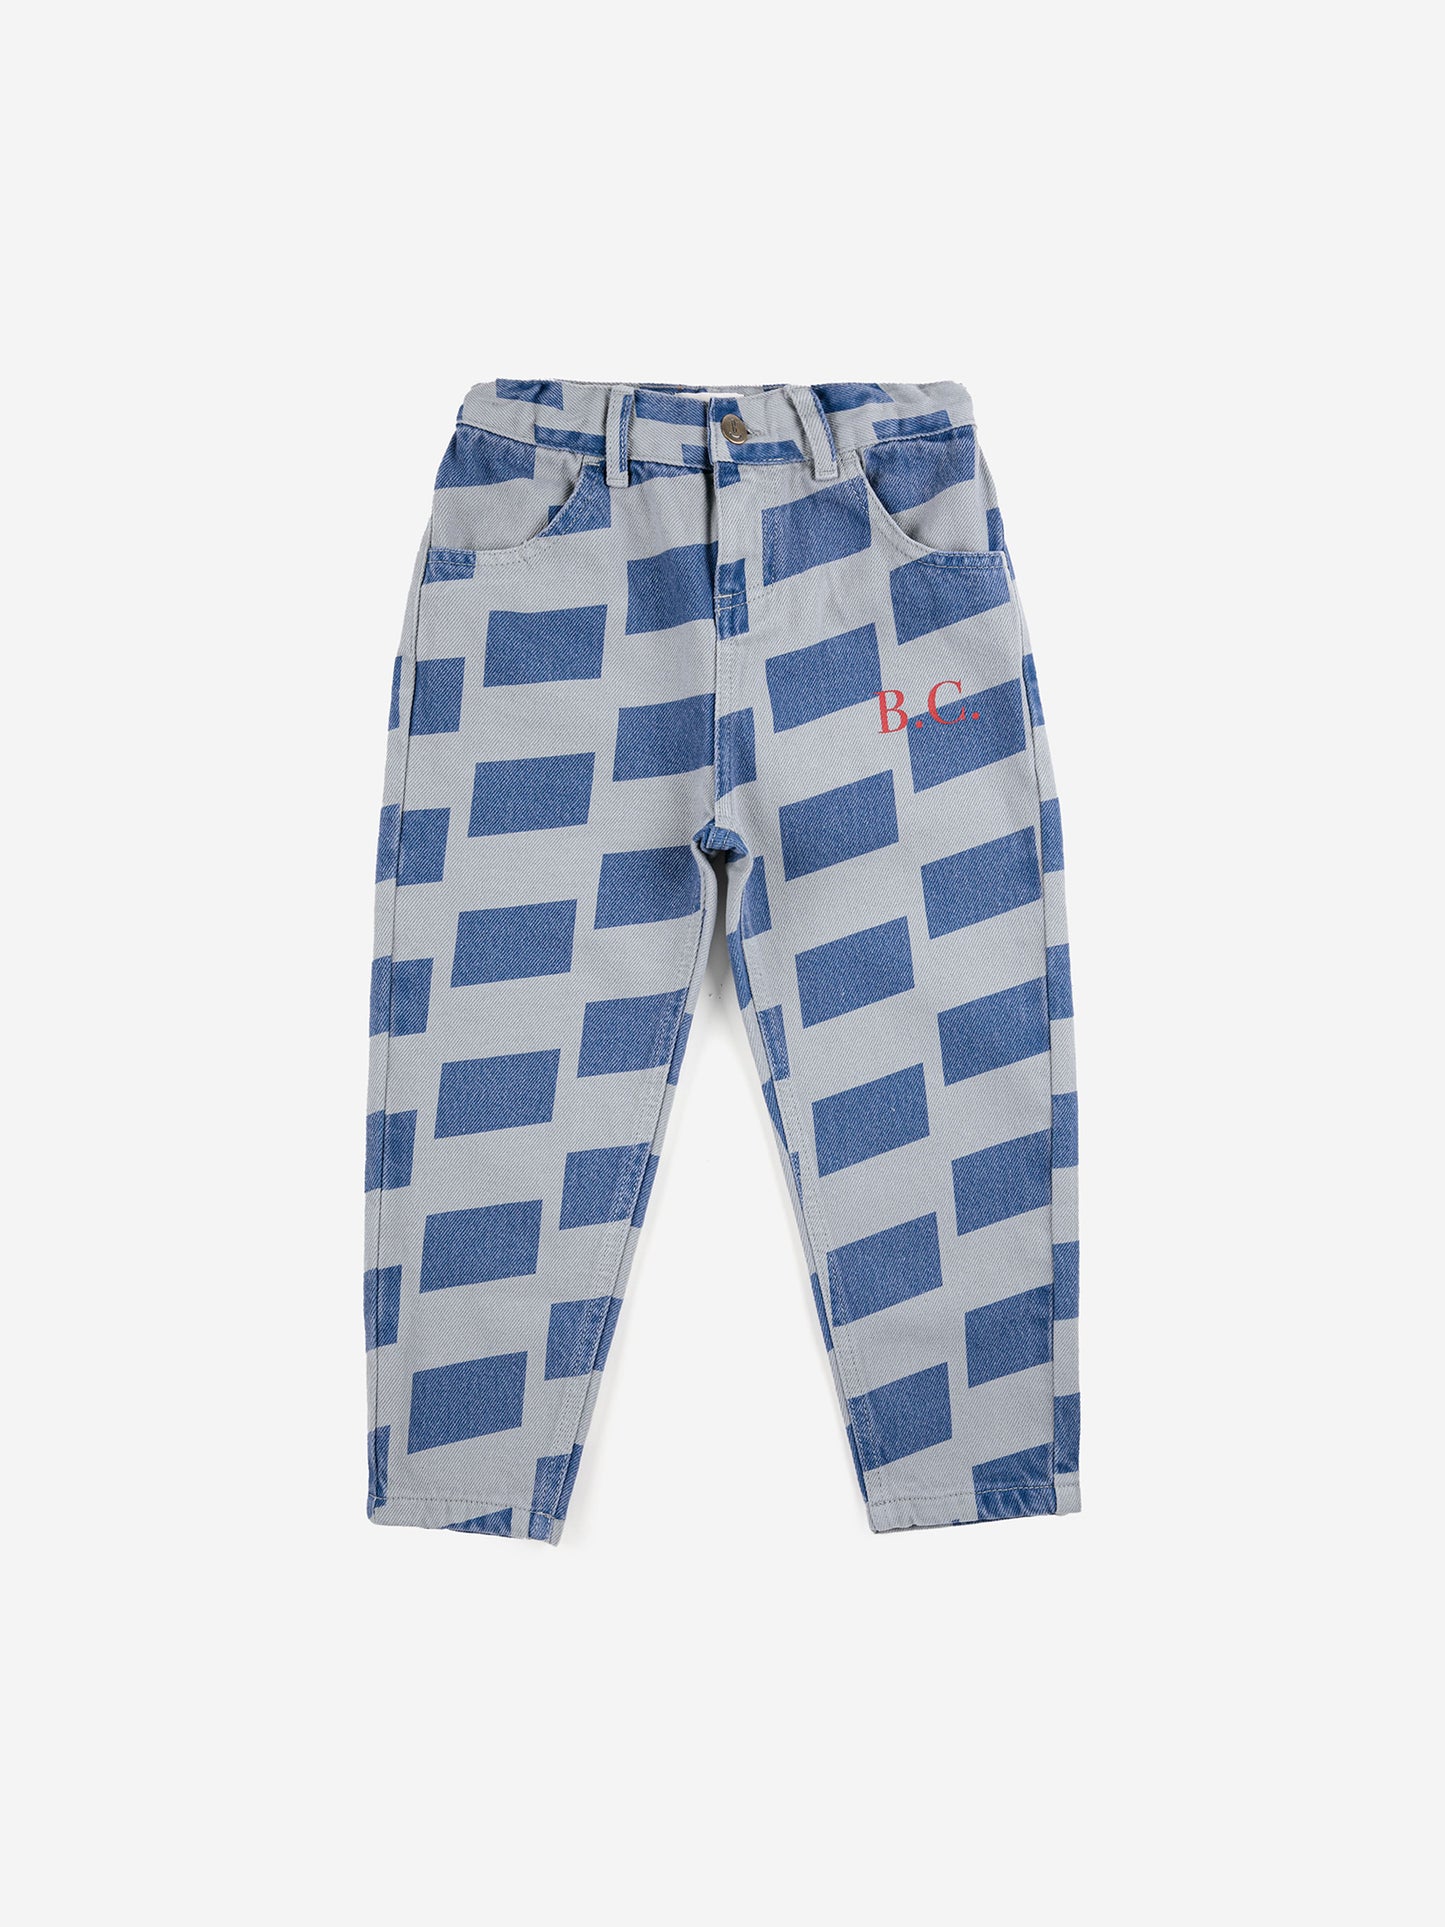 Checkered all over denim pants